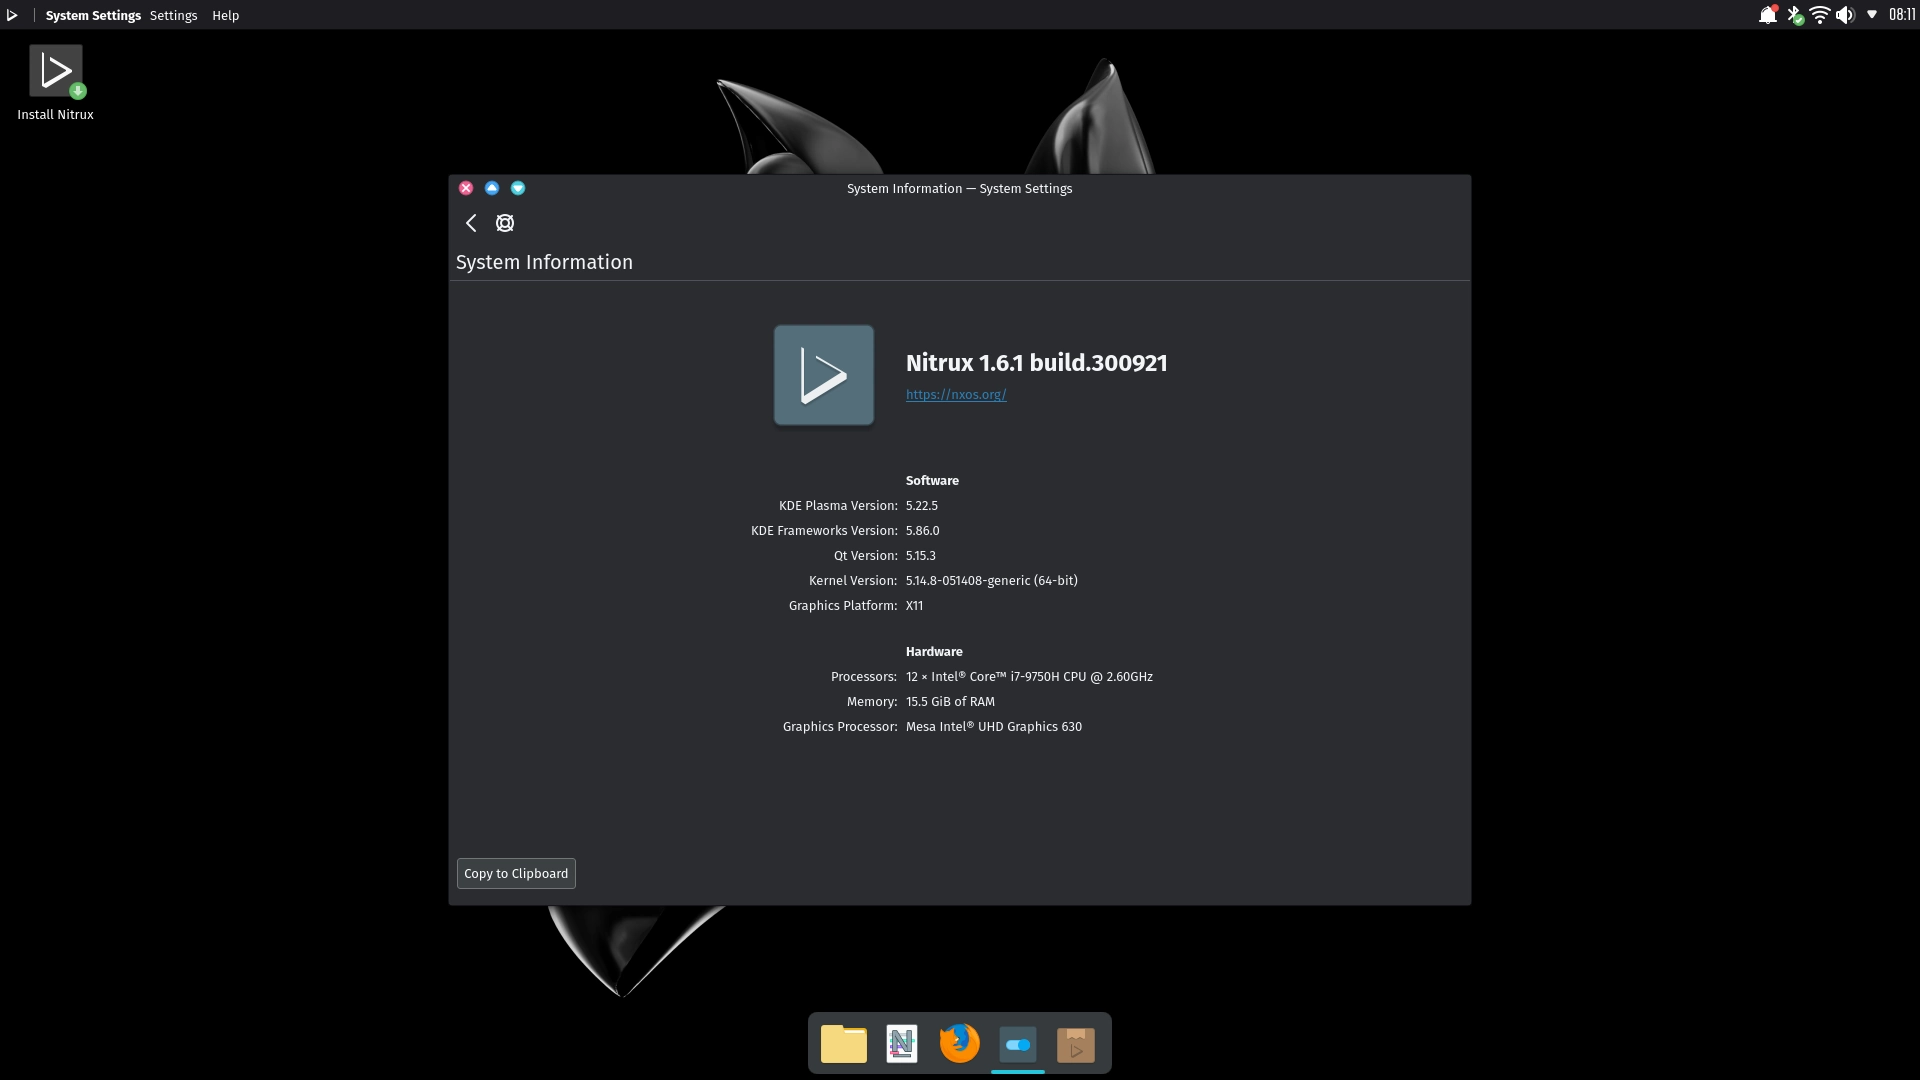 Nitrux 1.6.1 Is Here as One of the First Distros to Ship with Linux 5.14 as Default Kernel